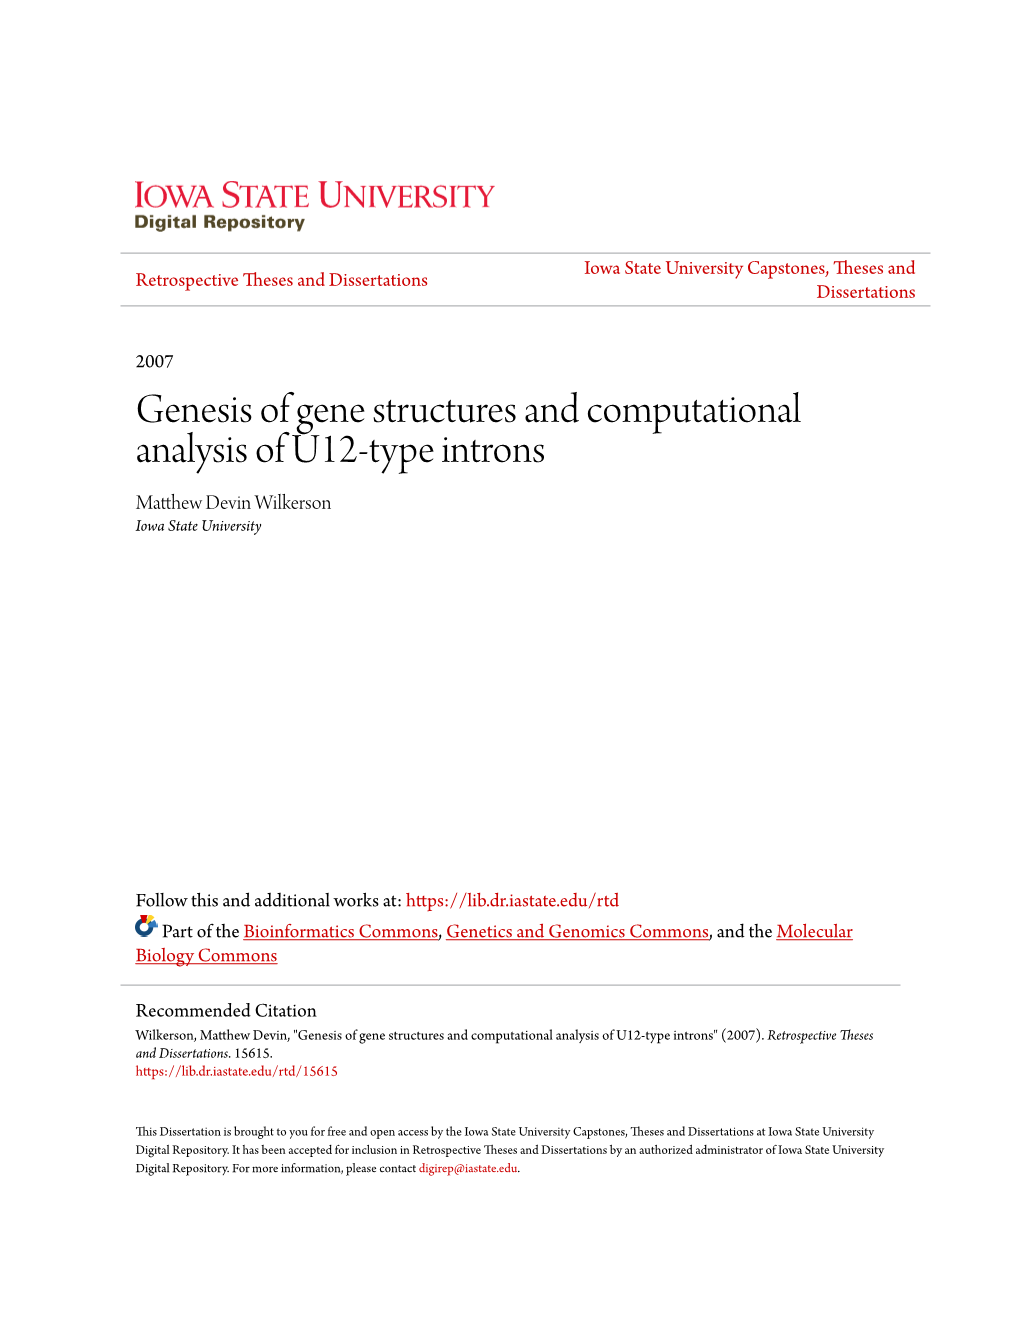 Genesis of Gene Structures and Computational Analysis of U12-Type Introns Matthew Evd in Wilkerson Iowa State University